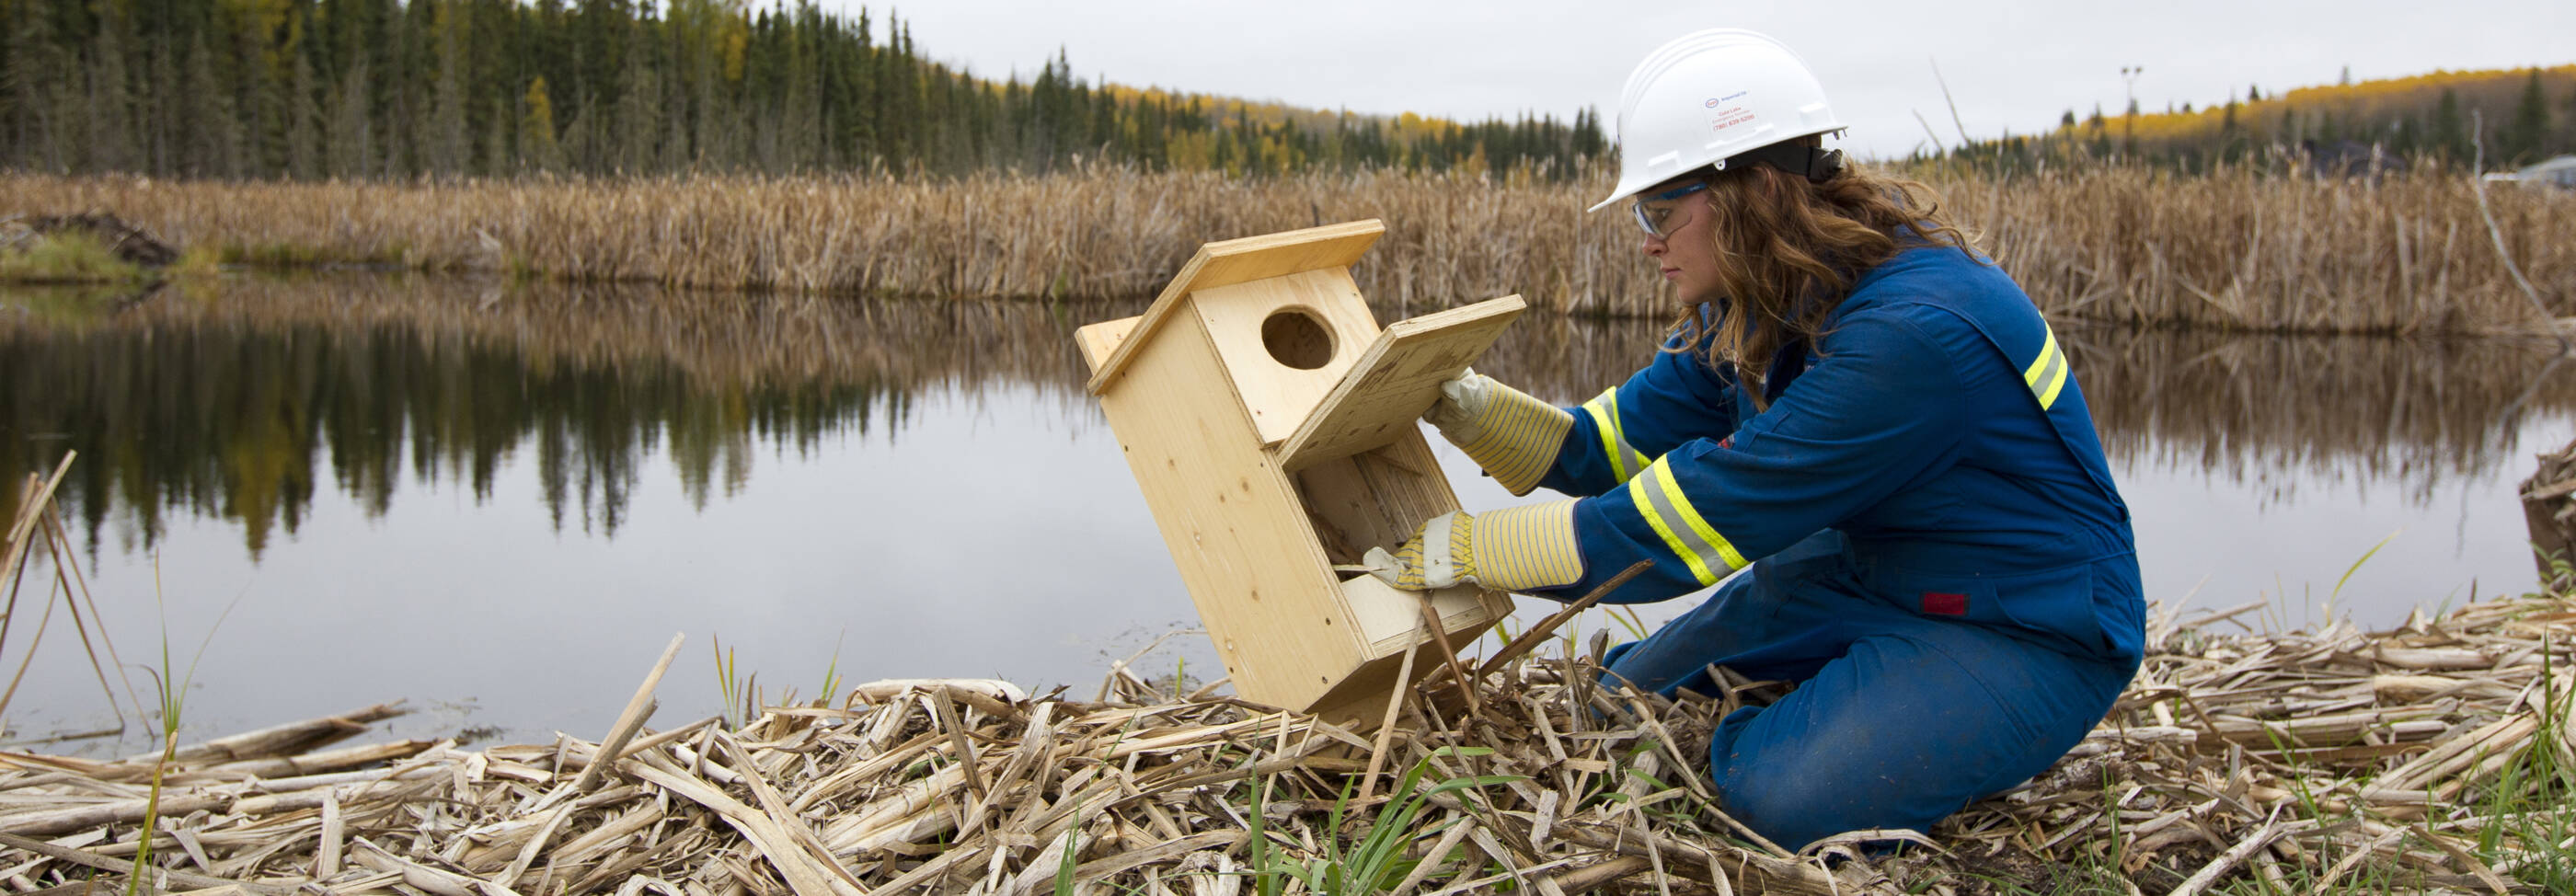 Imperial employee inspecting bird house (box) along side a lake